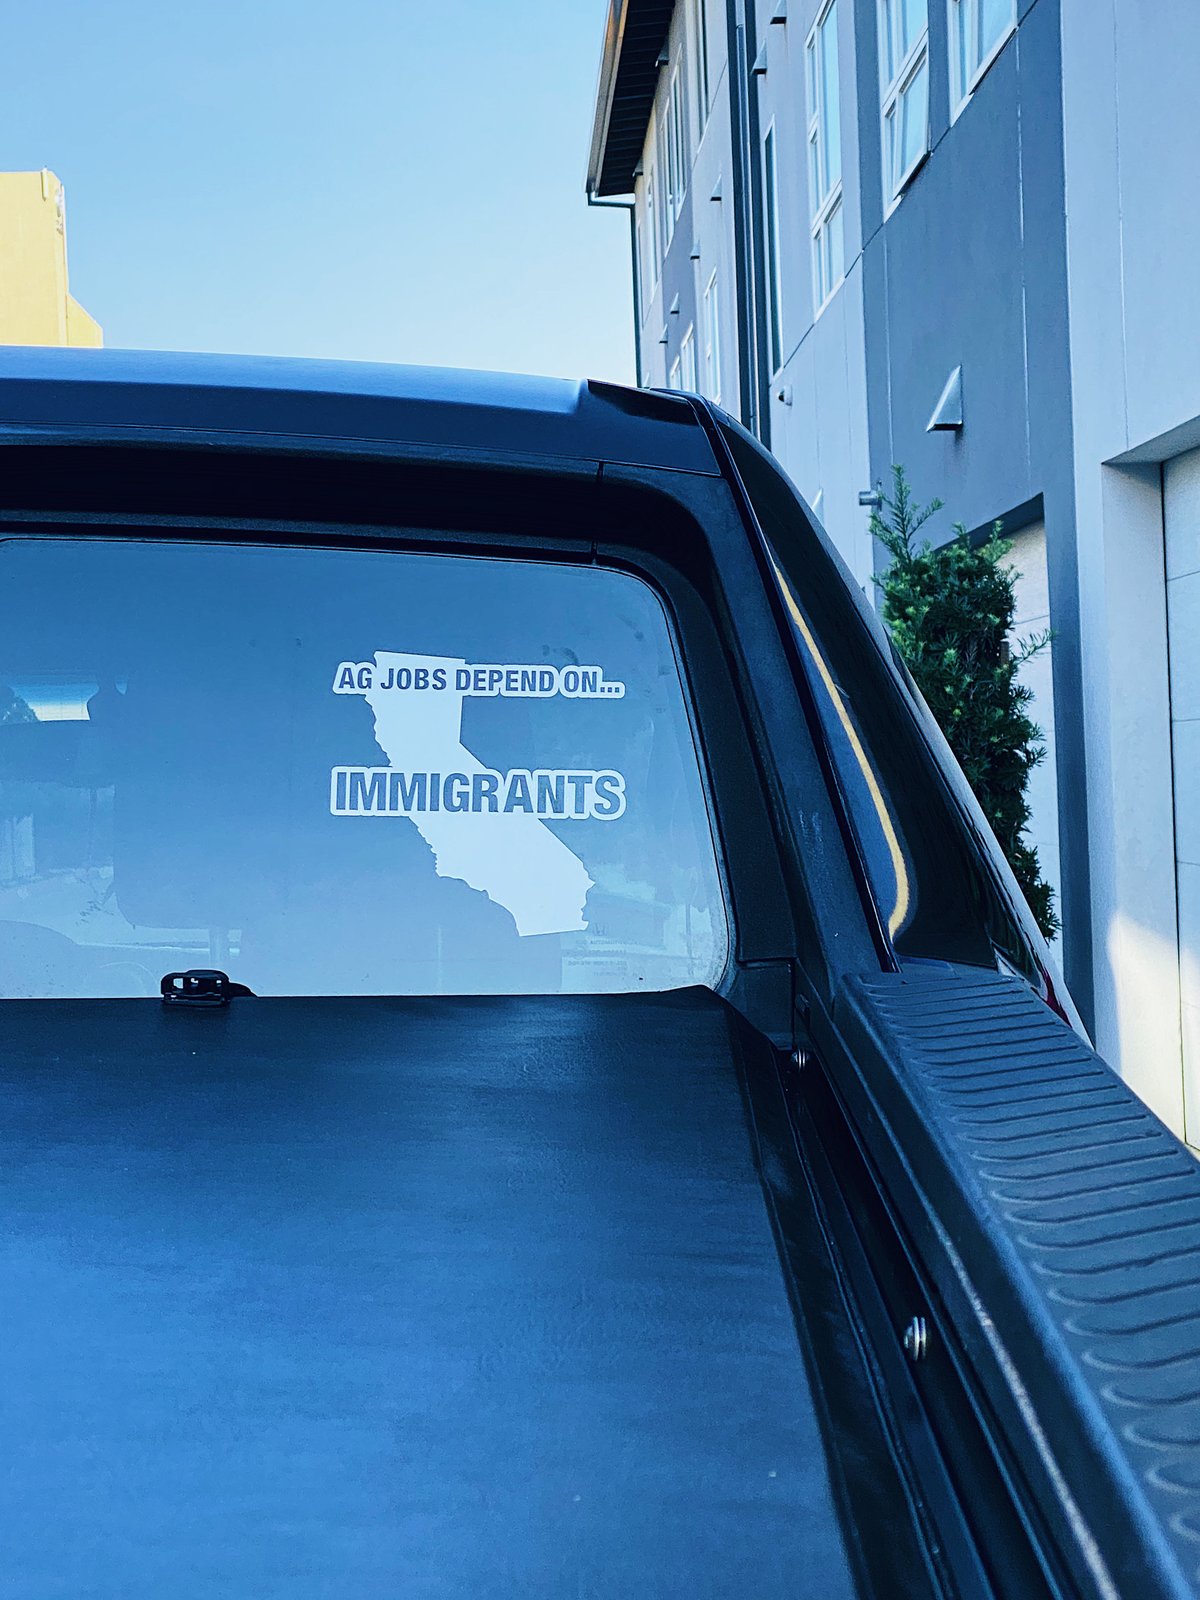 Ag Jobs Depend on Immigrants | Decal